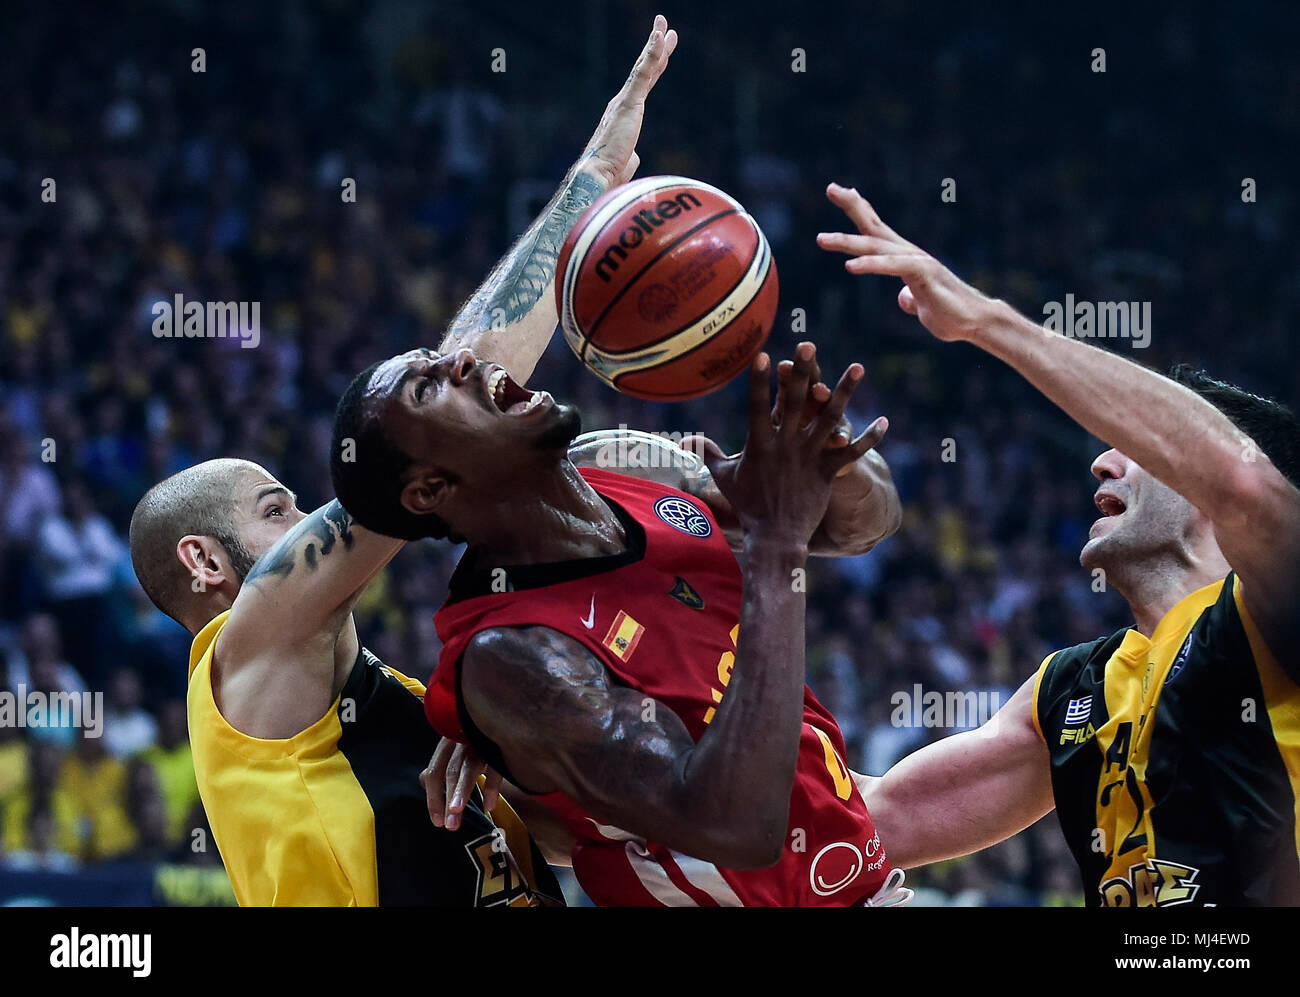 04 May 2018, Greece, Athens: Basketball, champions league, final four,  semi-final. AEK Athen vs UCAM Murcia. UCAM's Augusto Lima (C) in action.  Photo: Angelos Tzortzinis/dpa Stock Photo - Alamy